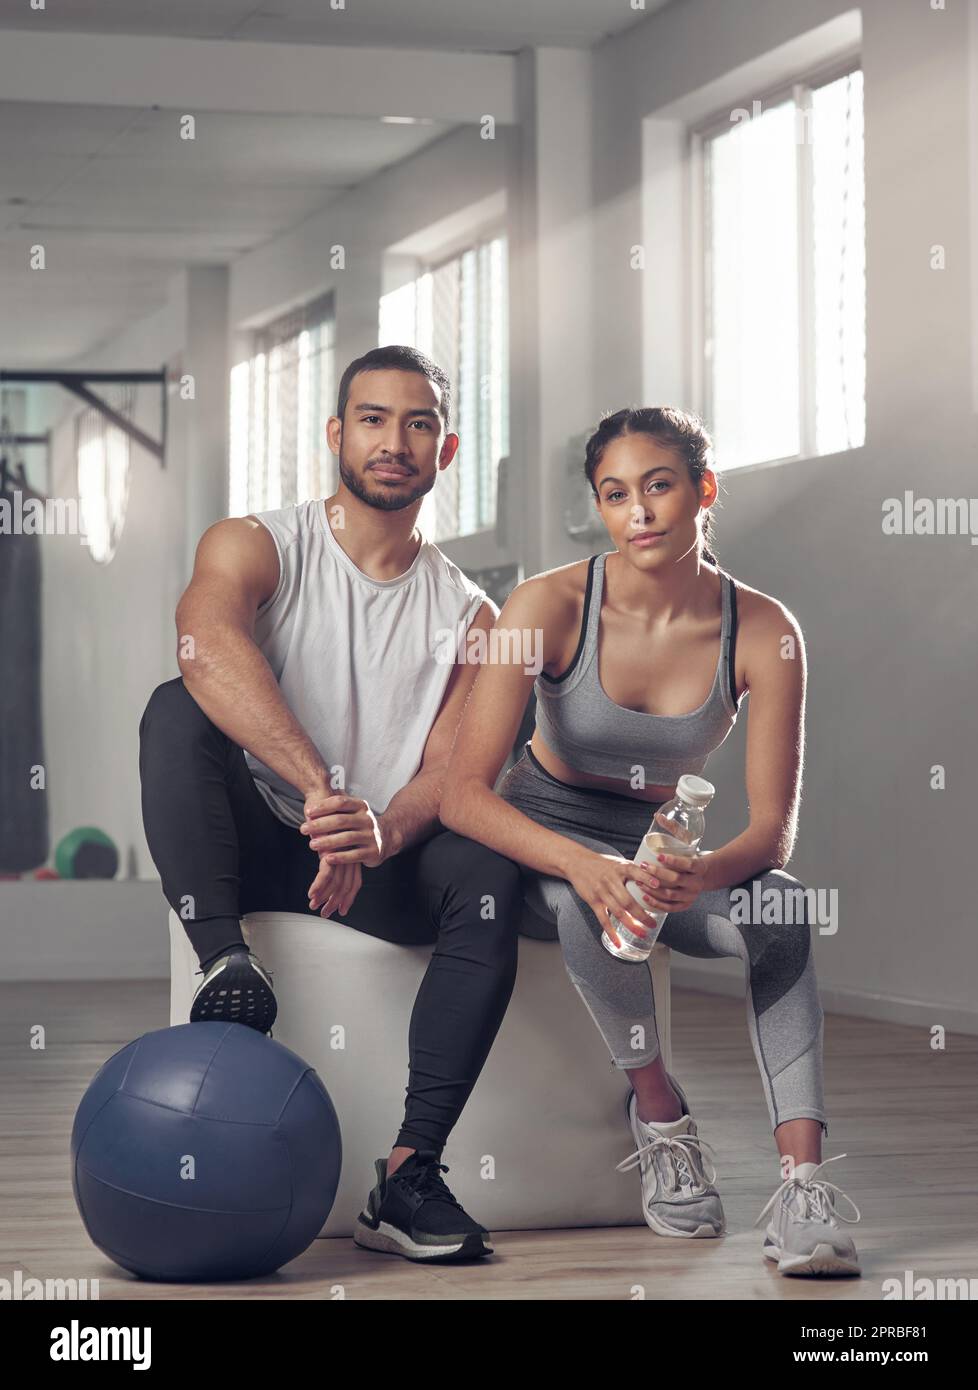 Were got 99 problems and laziness aint one. two young athletes sitting together at the gym. Stock Photo